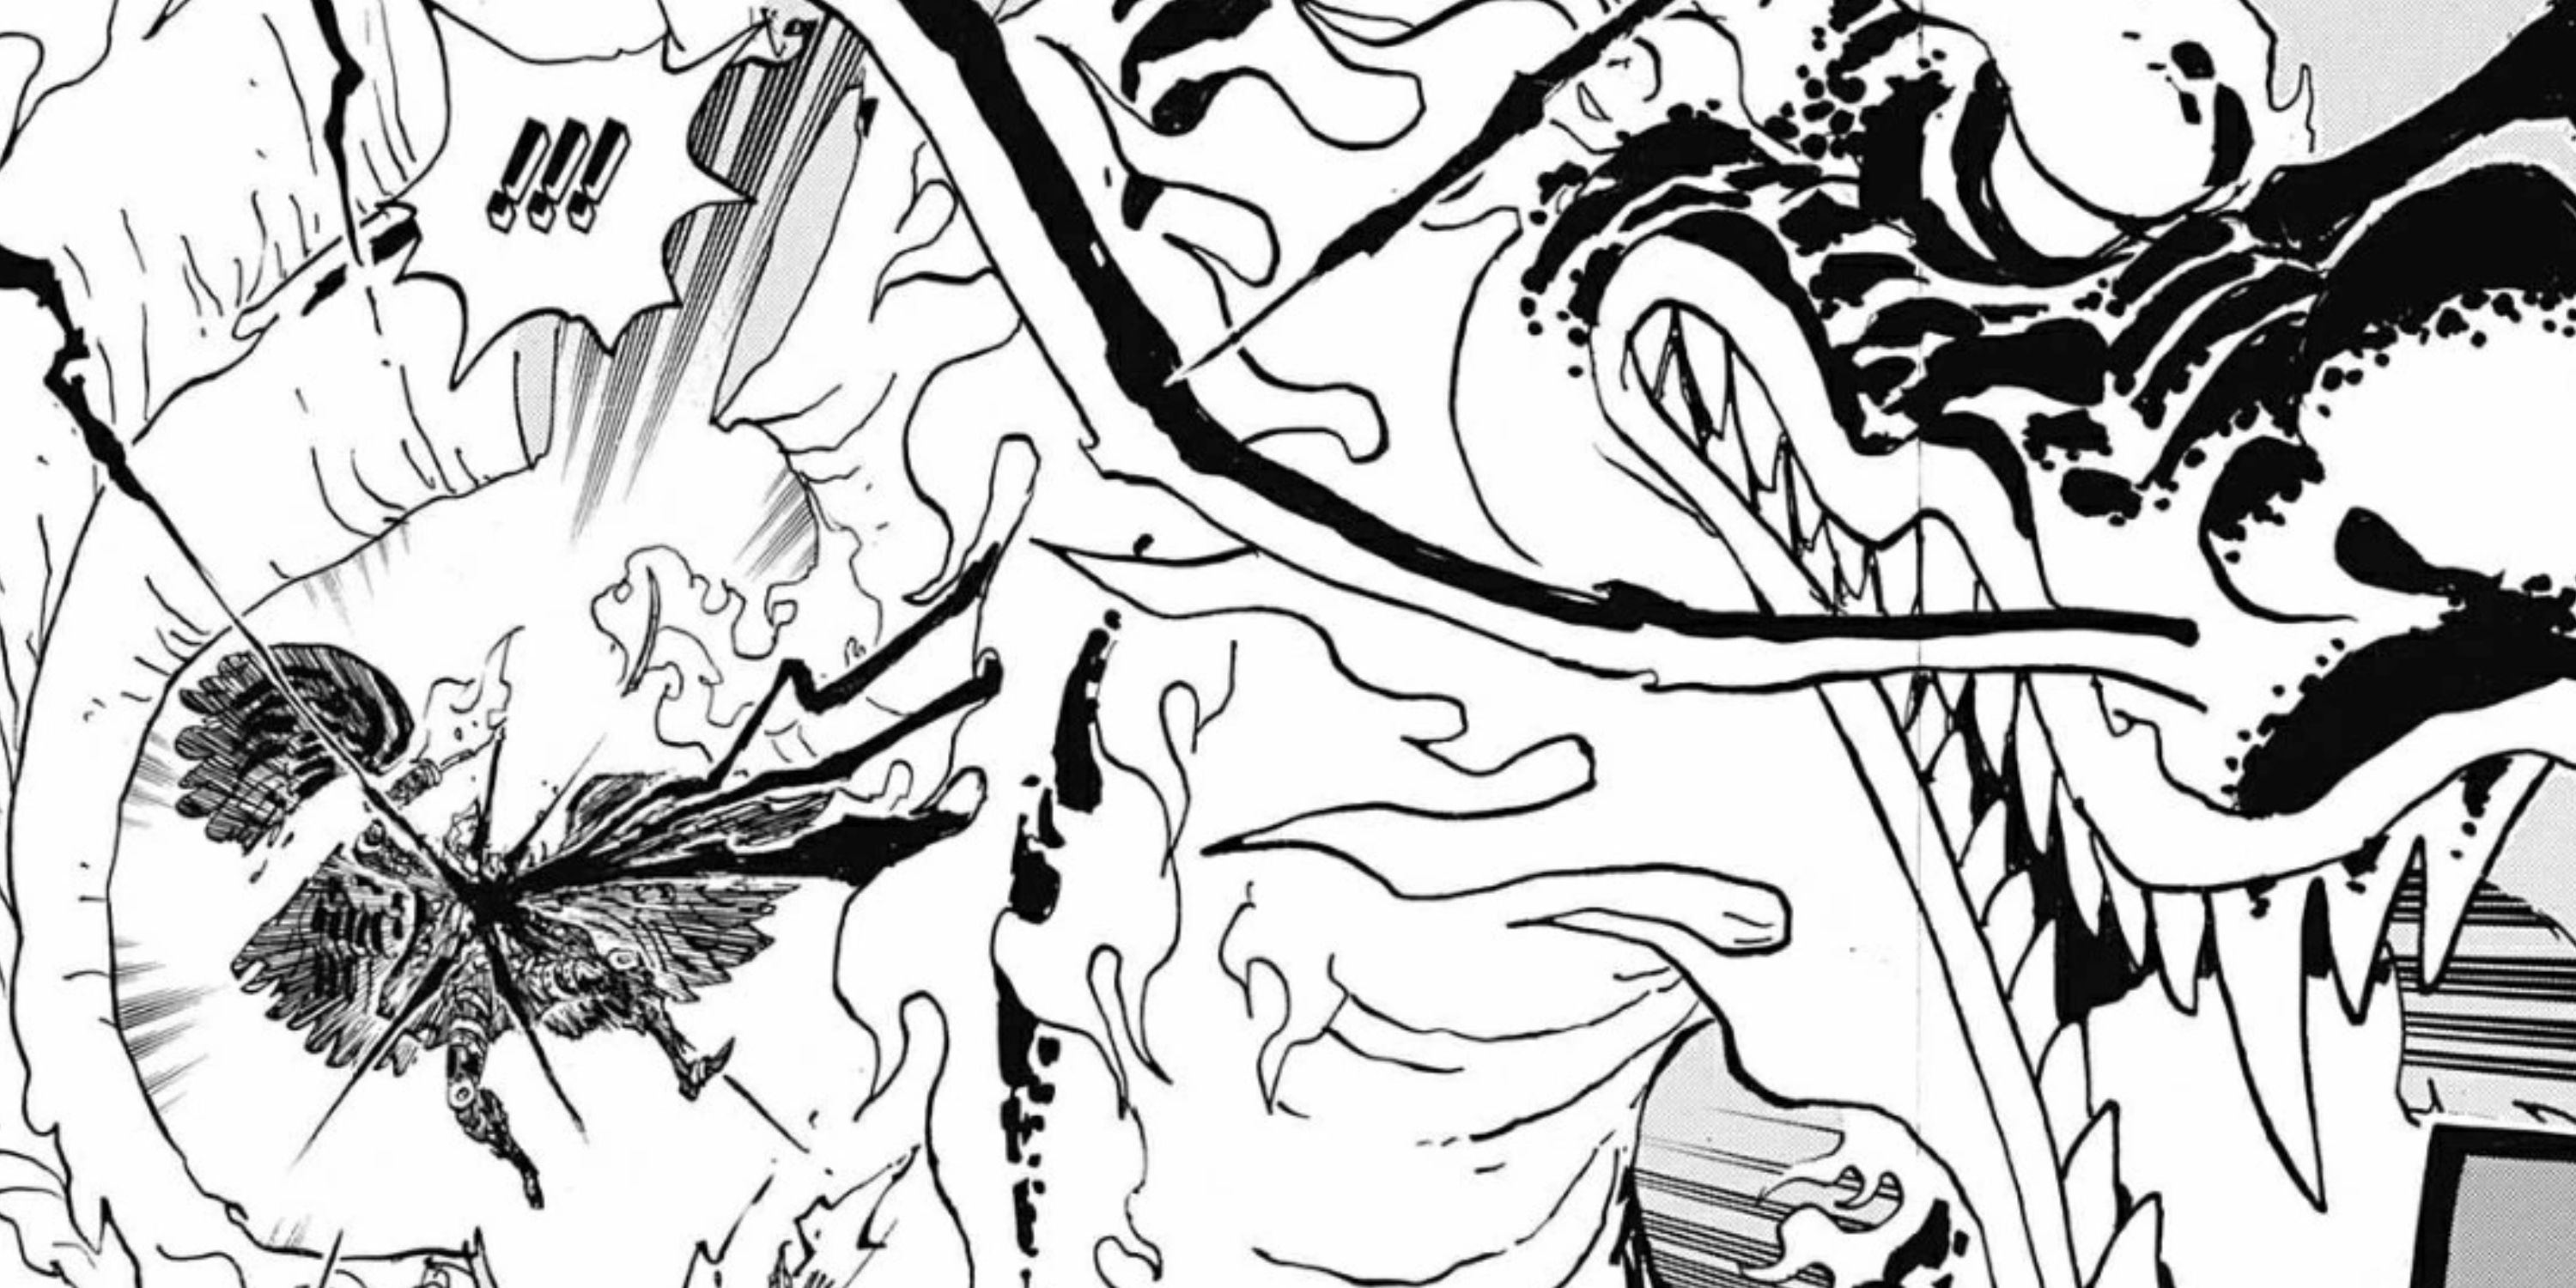 Roronoa Zoro using his King of Hell, Three-Sword Serpent: 103 Mercies Dragon Damnation attack against King the Conflagration during the Raid on Onigashima in One Piece's Wano Country arc